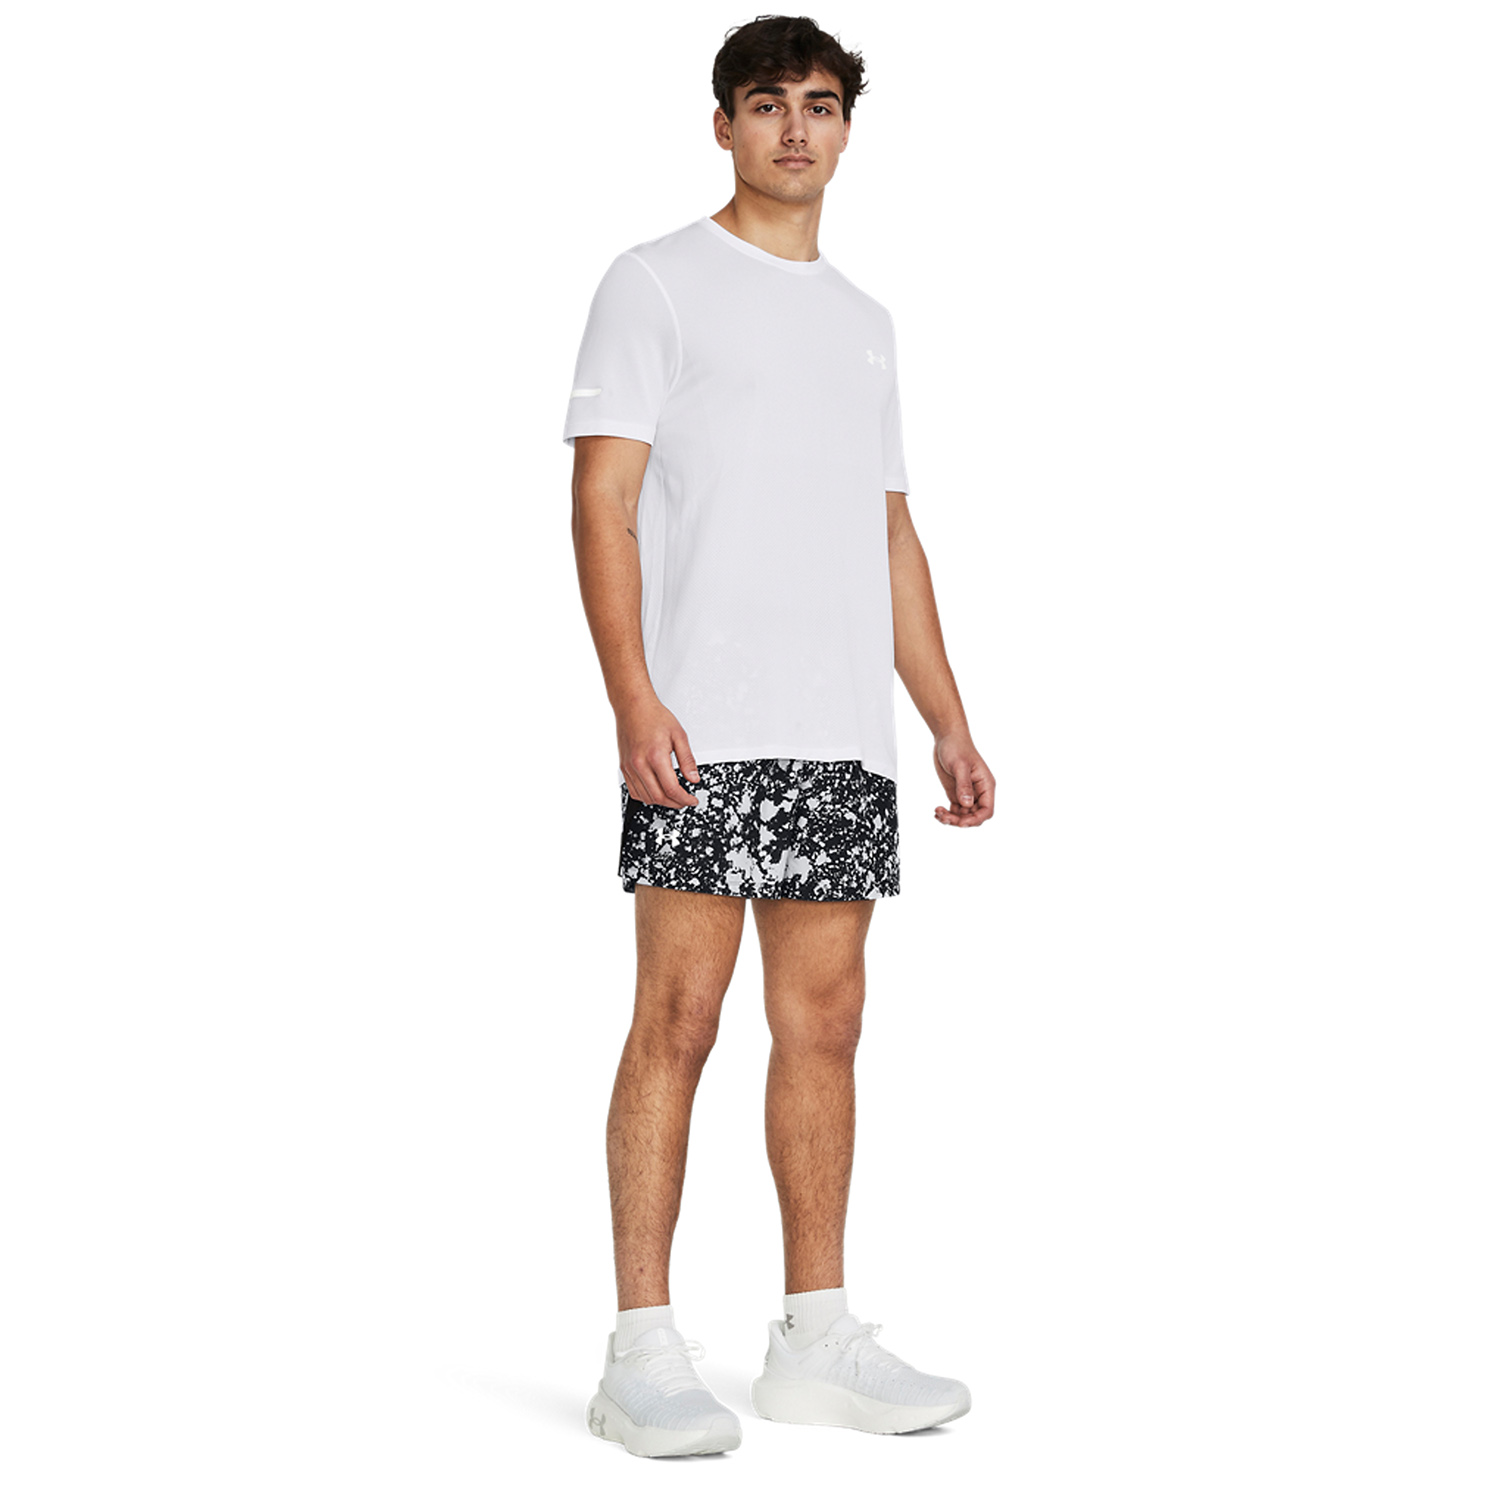 Under Armour Launch 5in Shorts - Black/Reflective